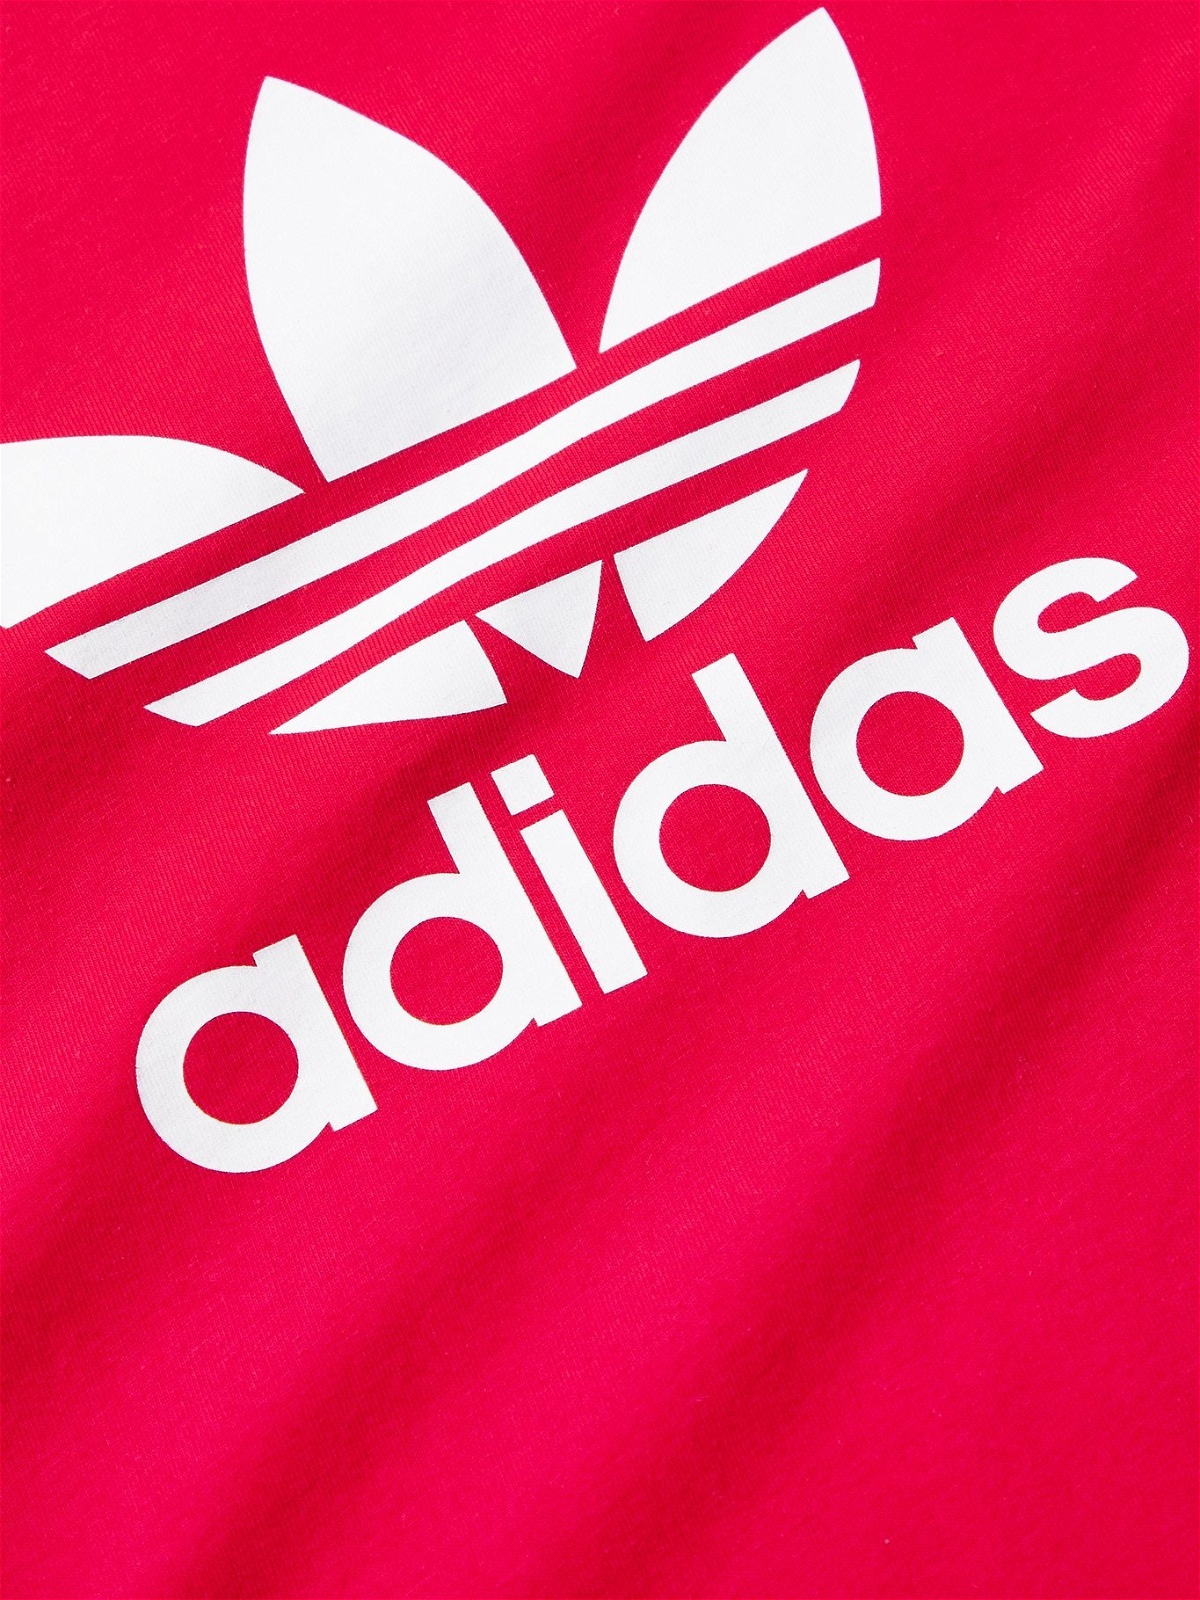 red adidas logo wallpapers